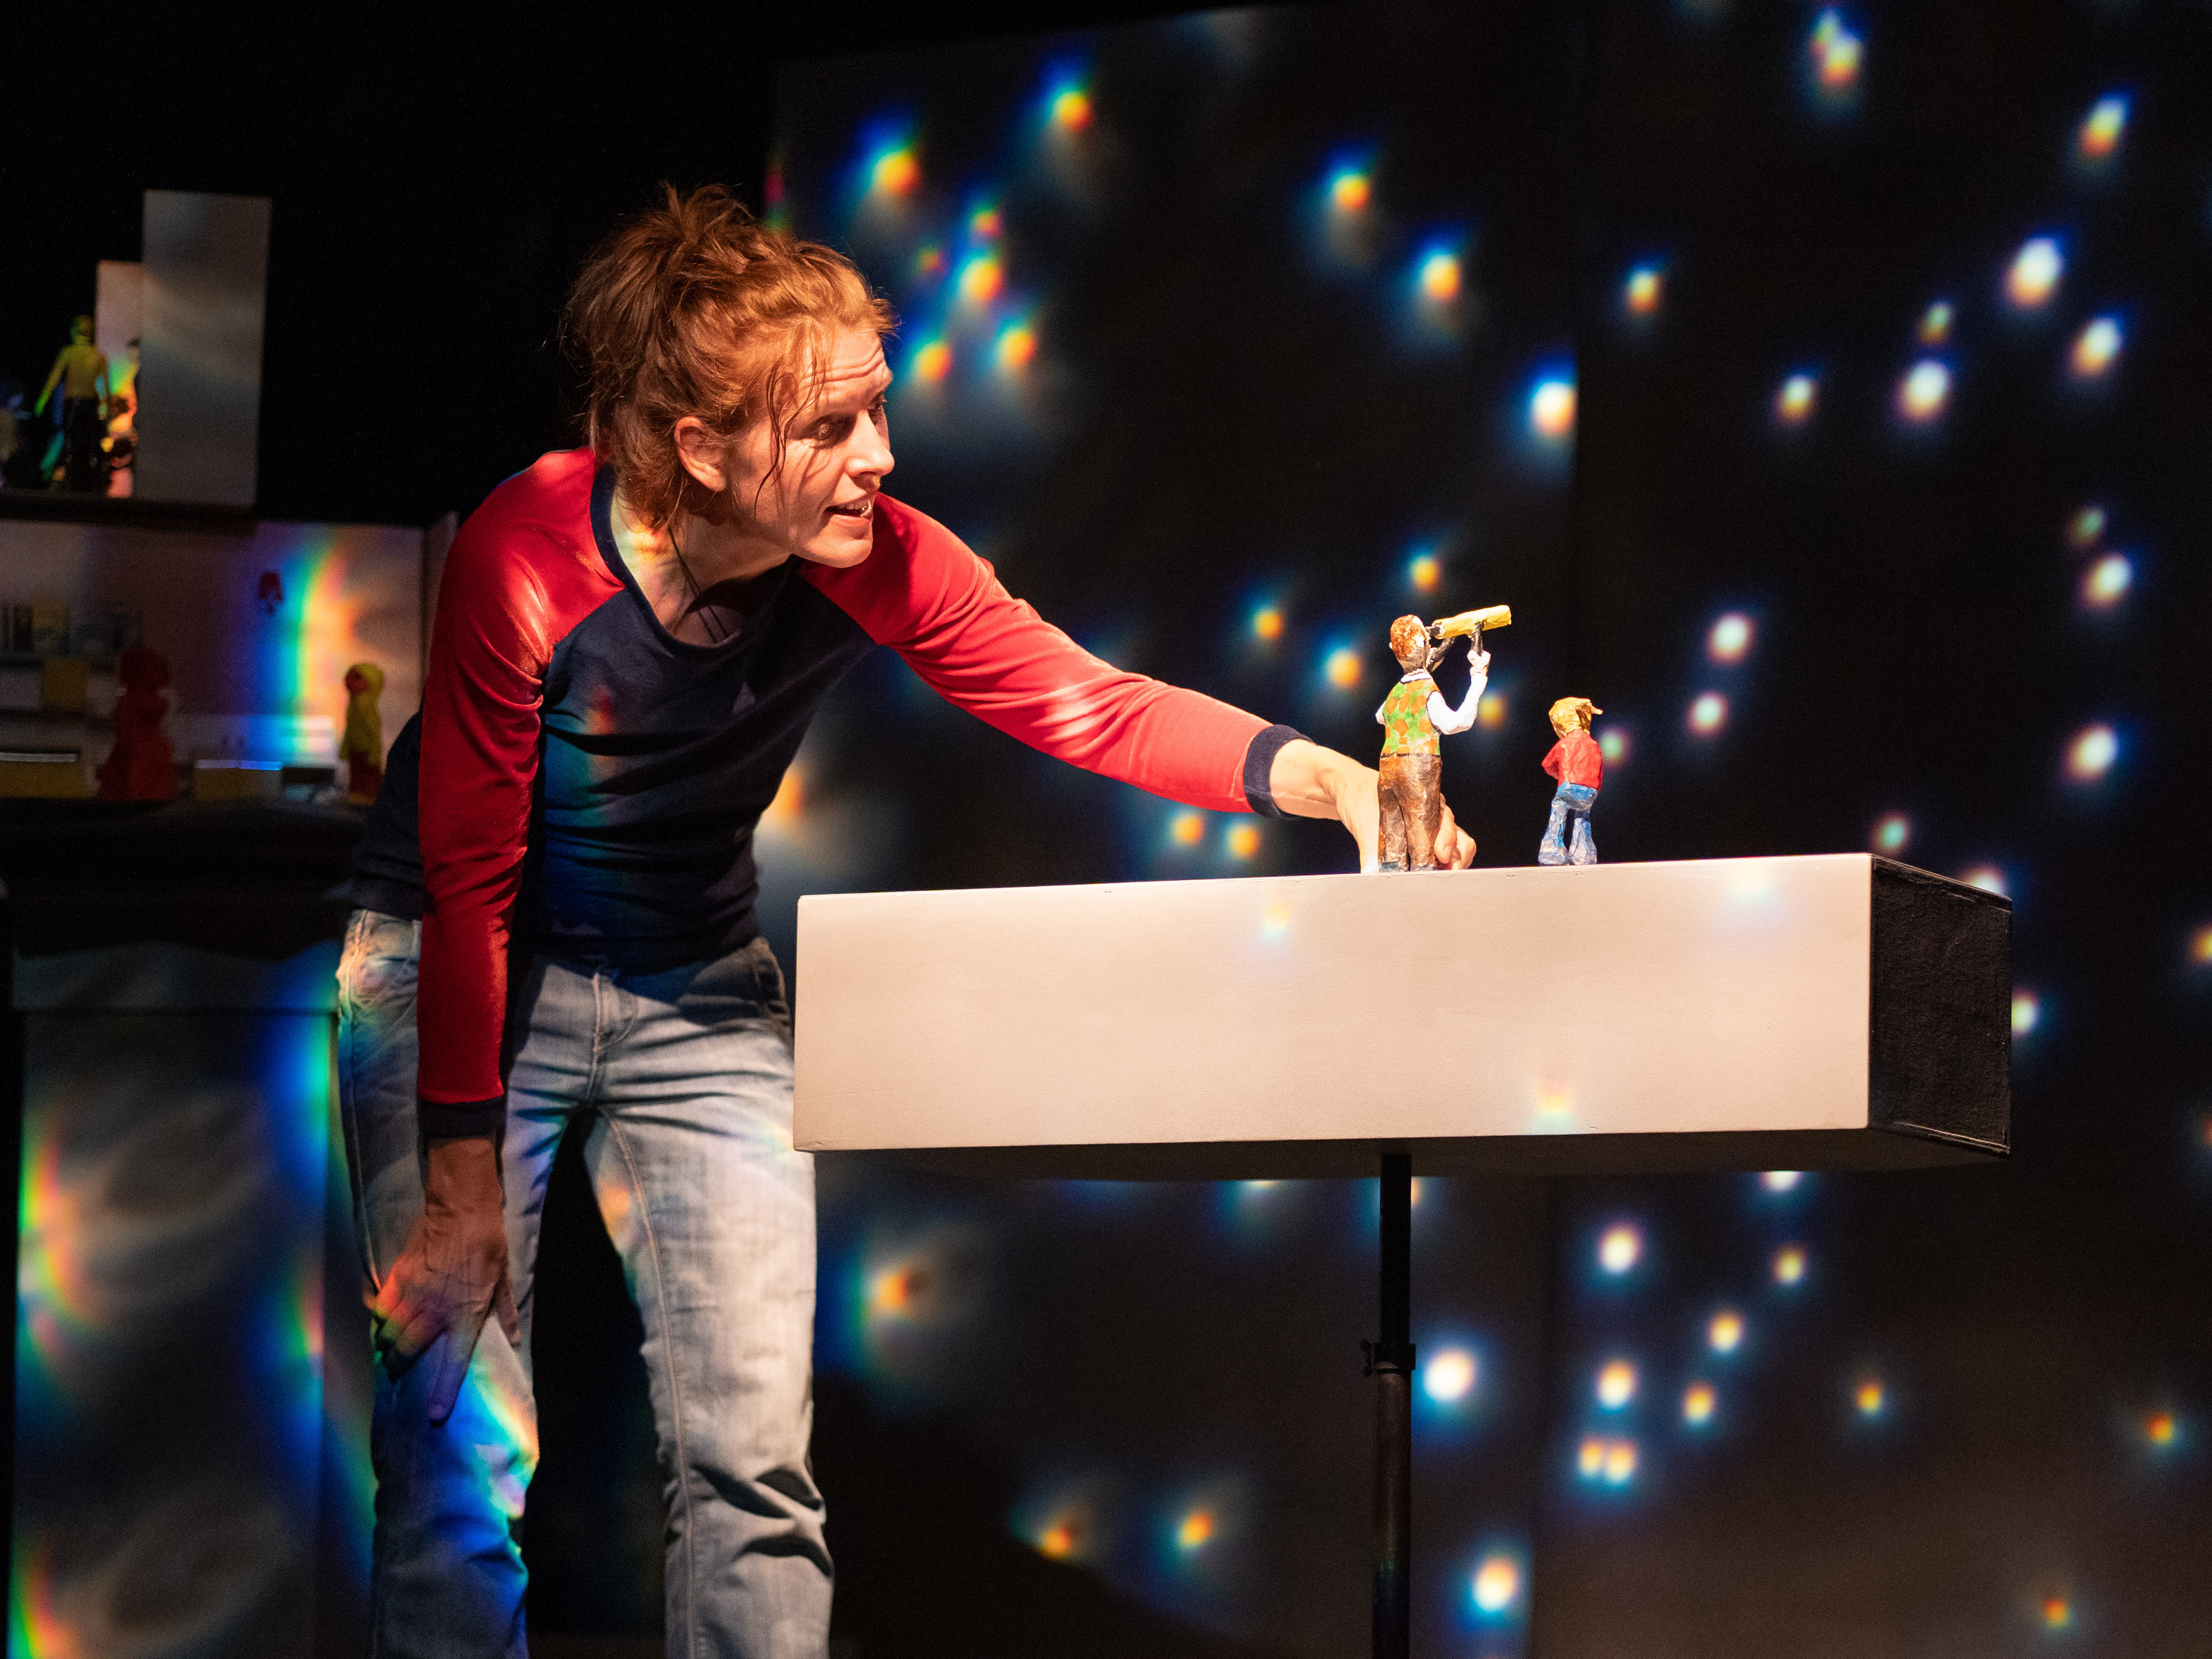 Puppeteer Annegret Geist bends over an elongated board at waist height. On the board is the figure of a little girl and a man with binoculars for stargazing. Behind them, bright dots are shining, simulating a starry sky.